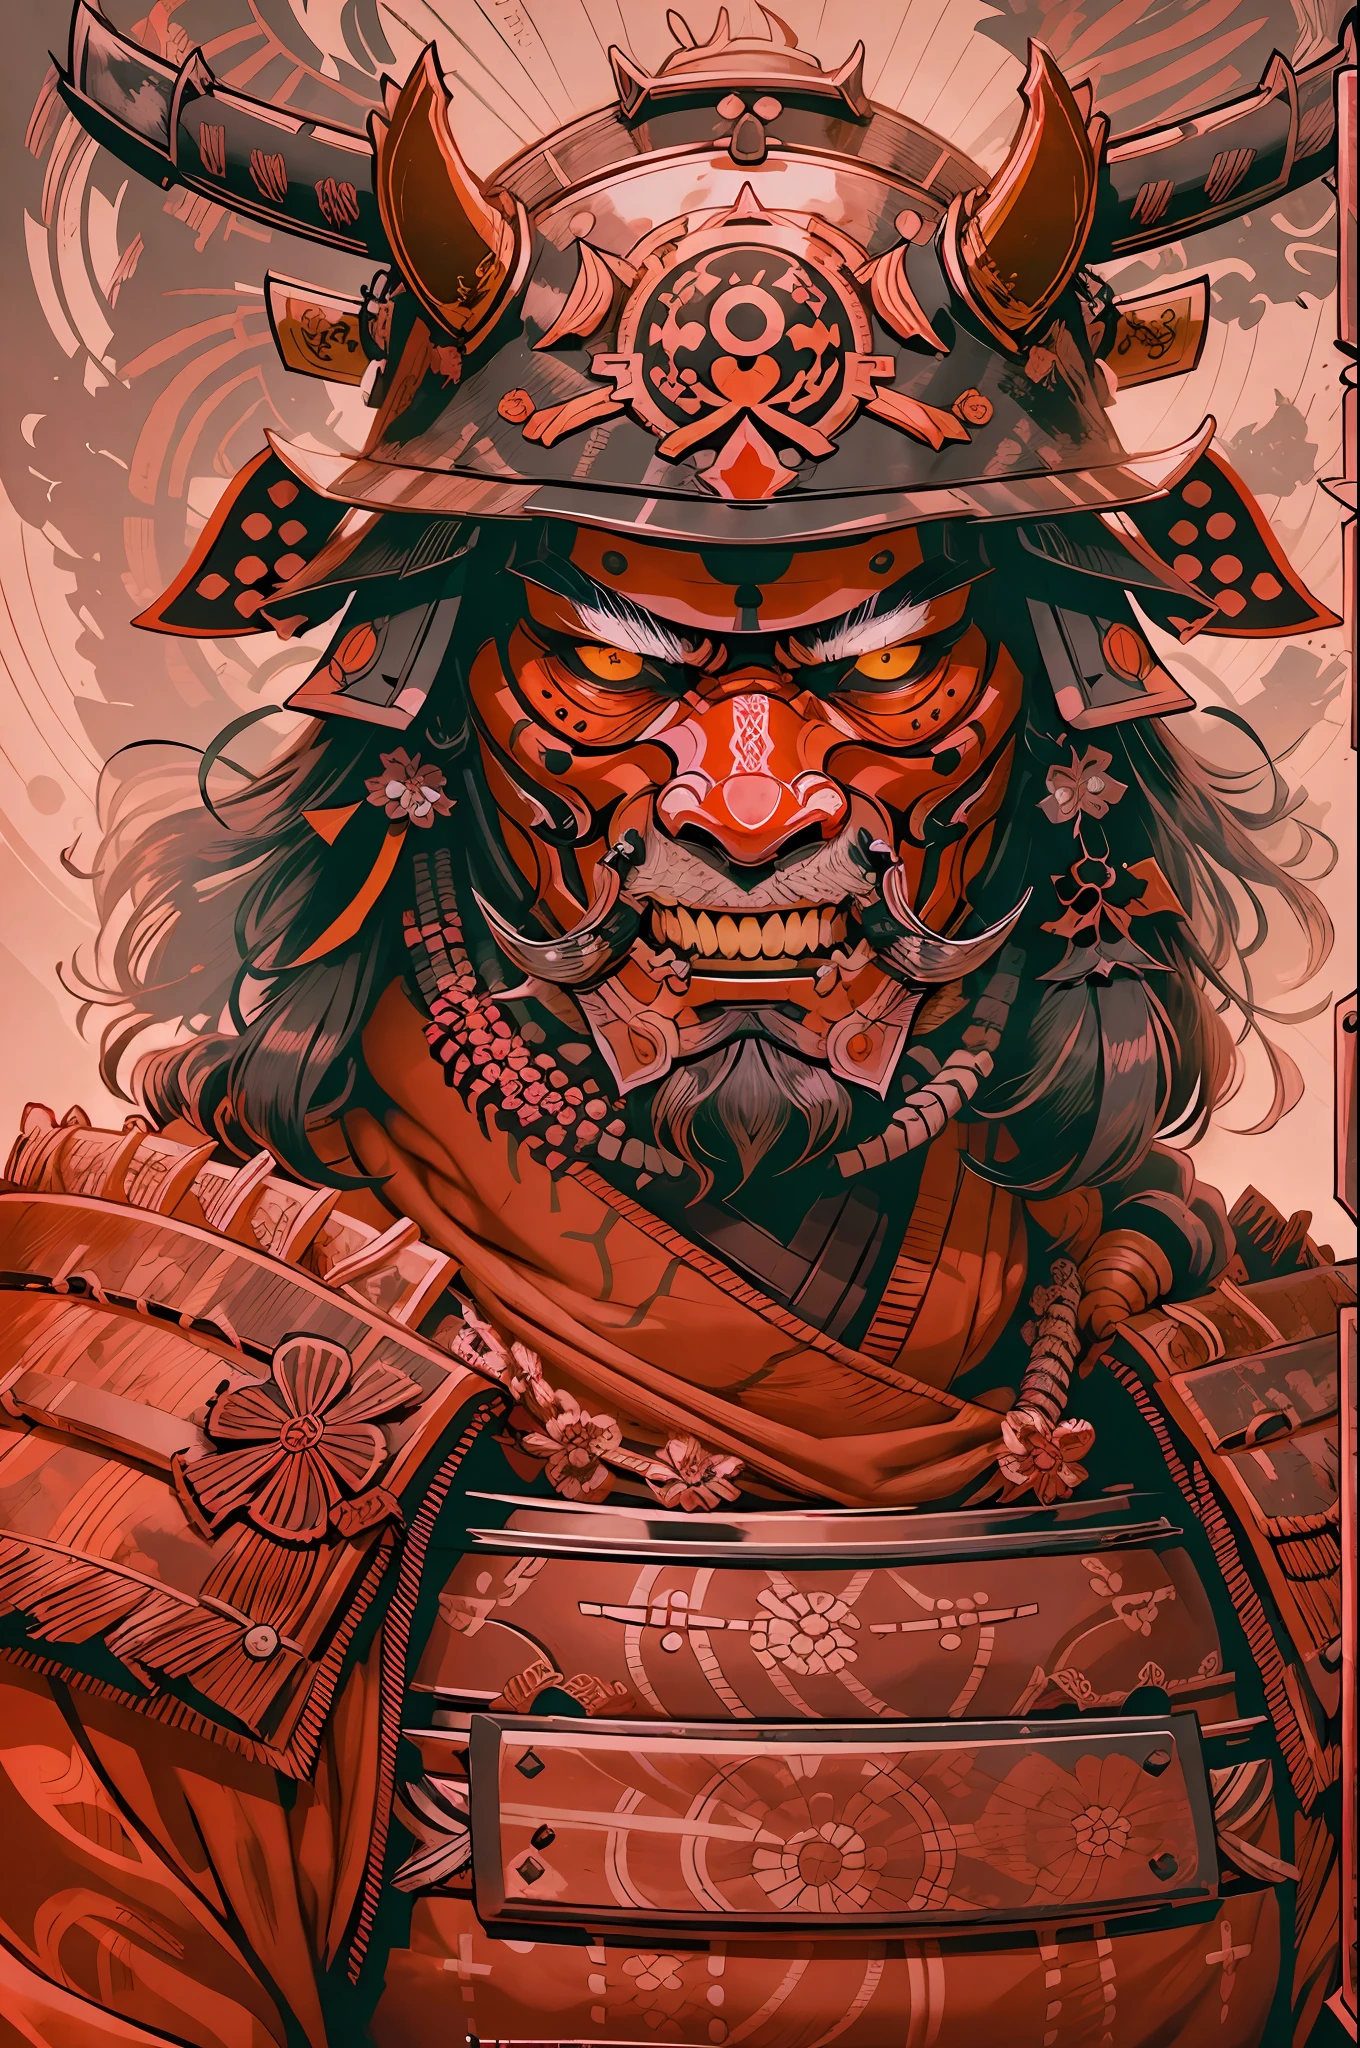 Samurai, red helmet, mask in the mouth, visible eyes, detailed face and helmet, close no rosto, illustration, FACING the viewer, ​masterpiece,highy detailed.